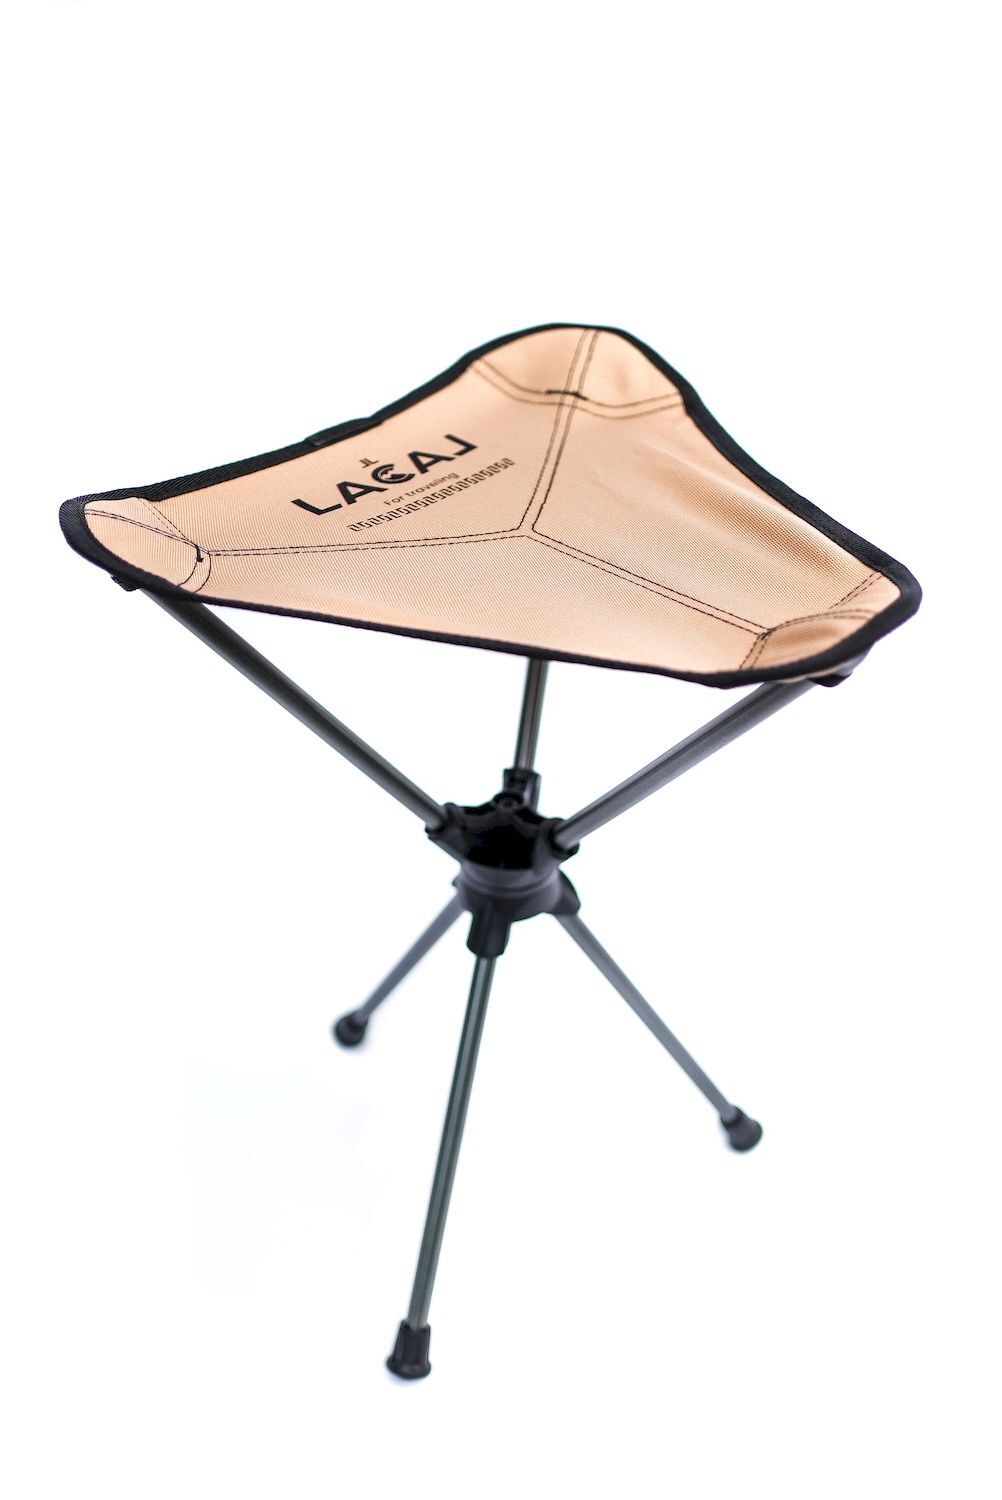 Lacal Nomad Stool - Campingstuhl